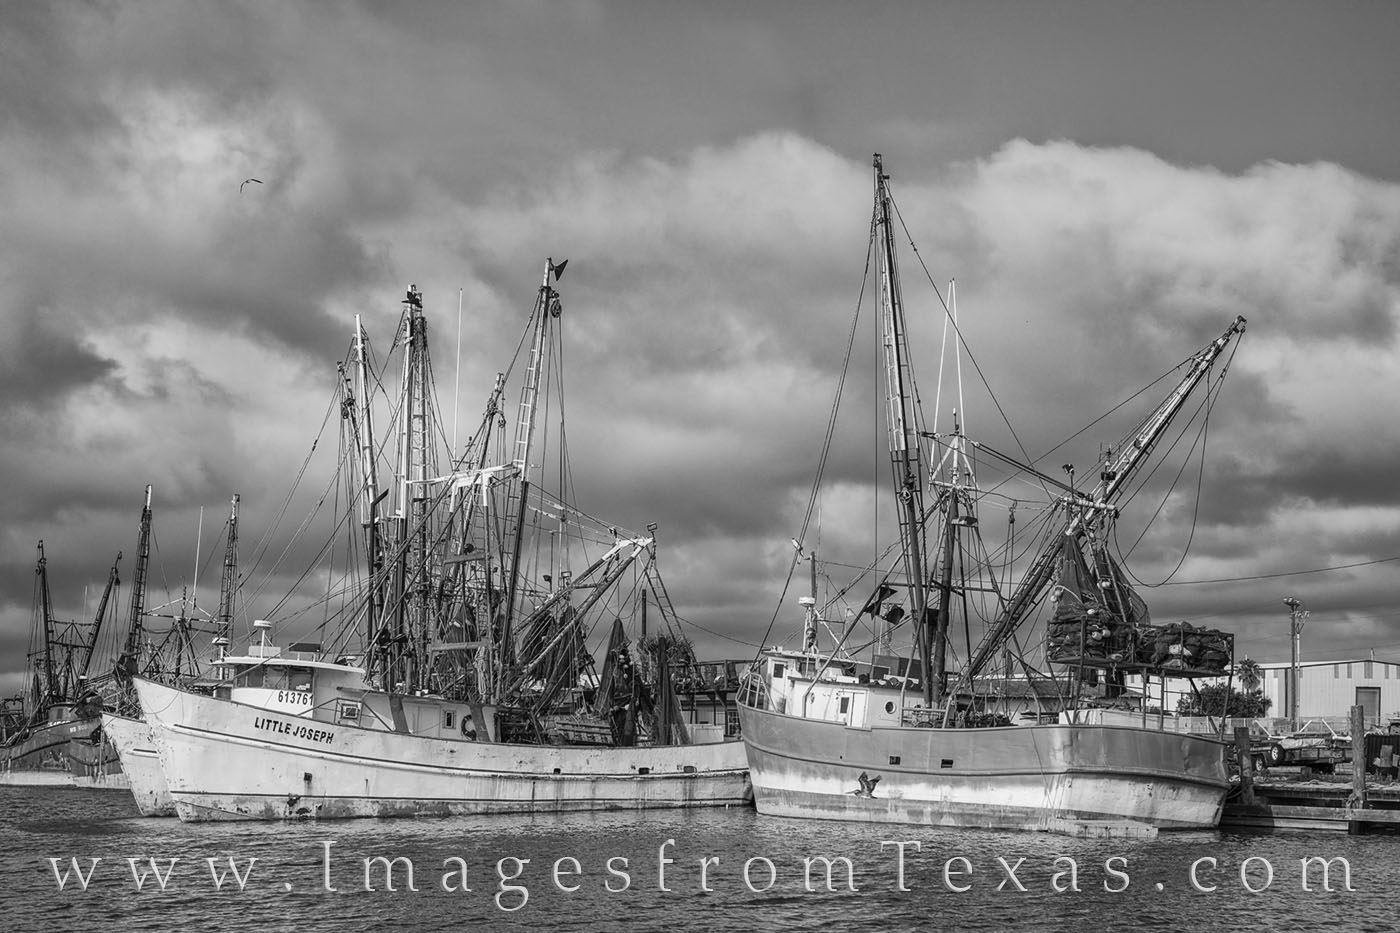 Shimp boats rest along a dock near Port Isabel in this black and white photograph from the Texas coast. Seagulls watched my every...